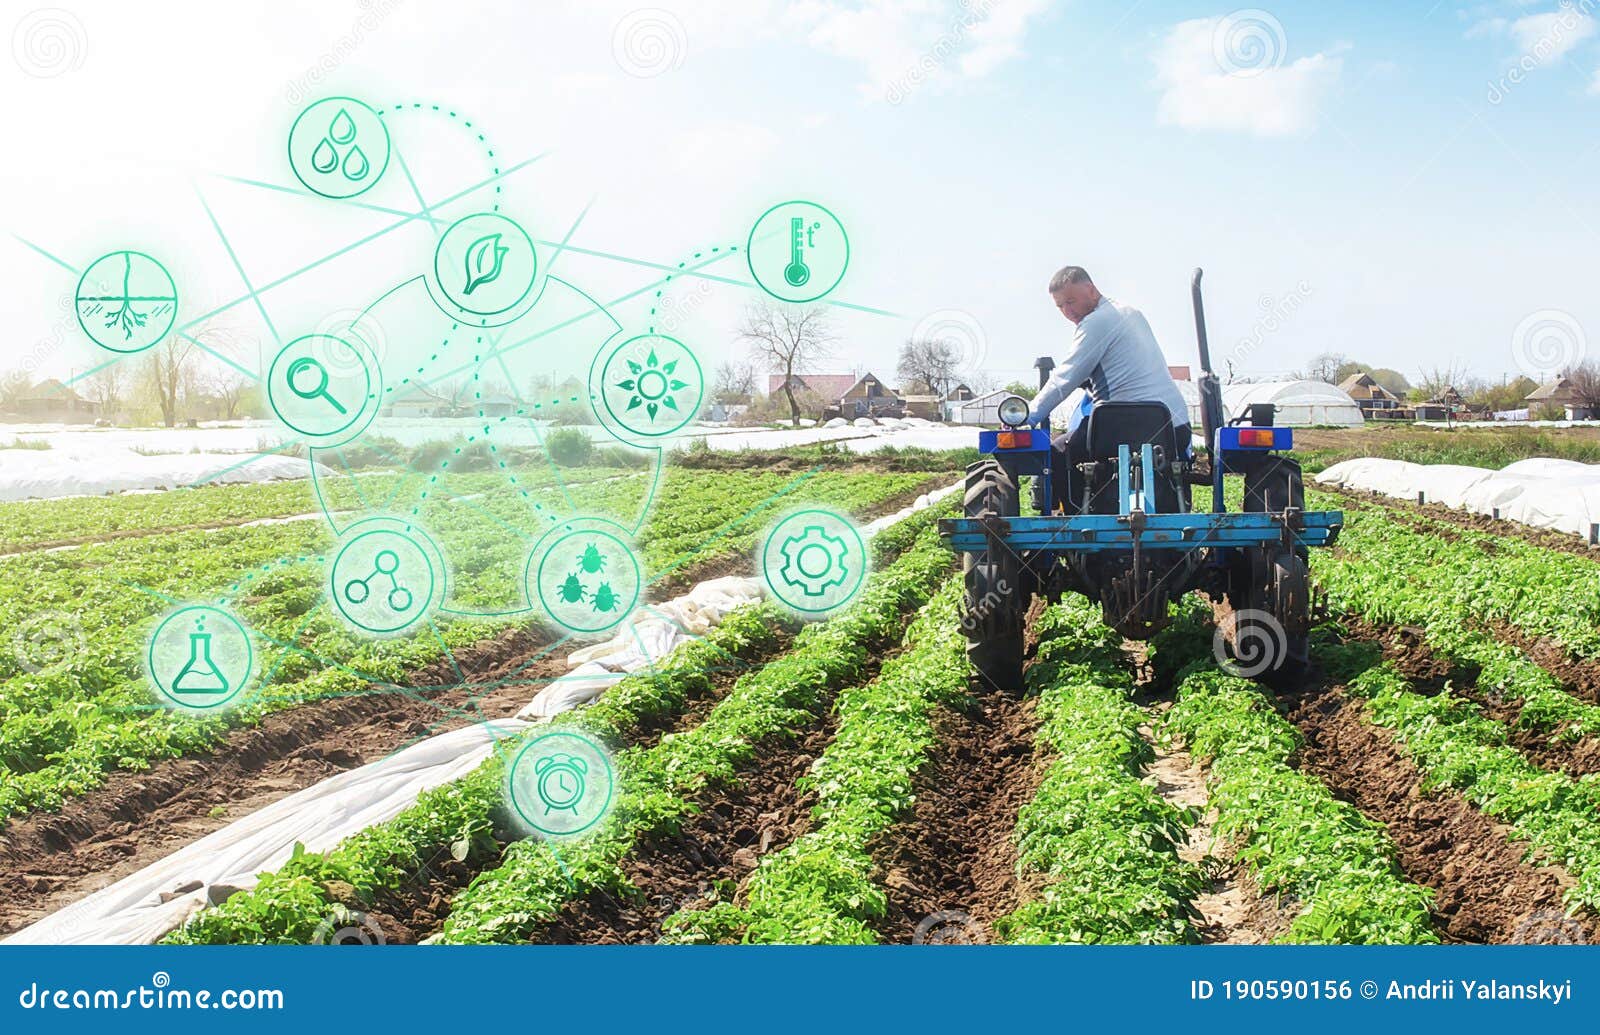 futuristic innovative technology pictogram and a farmer on a tractor. agricultural startups, improvements, digitalization